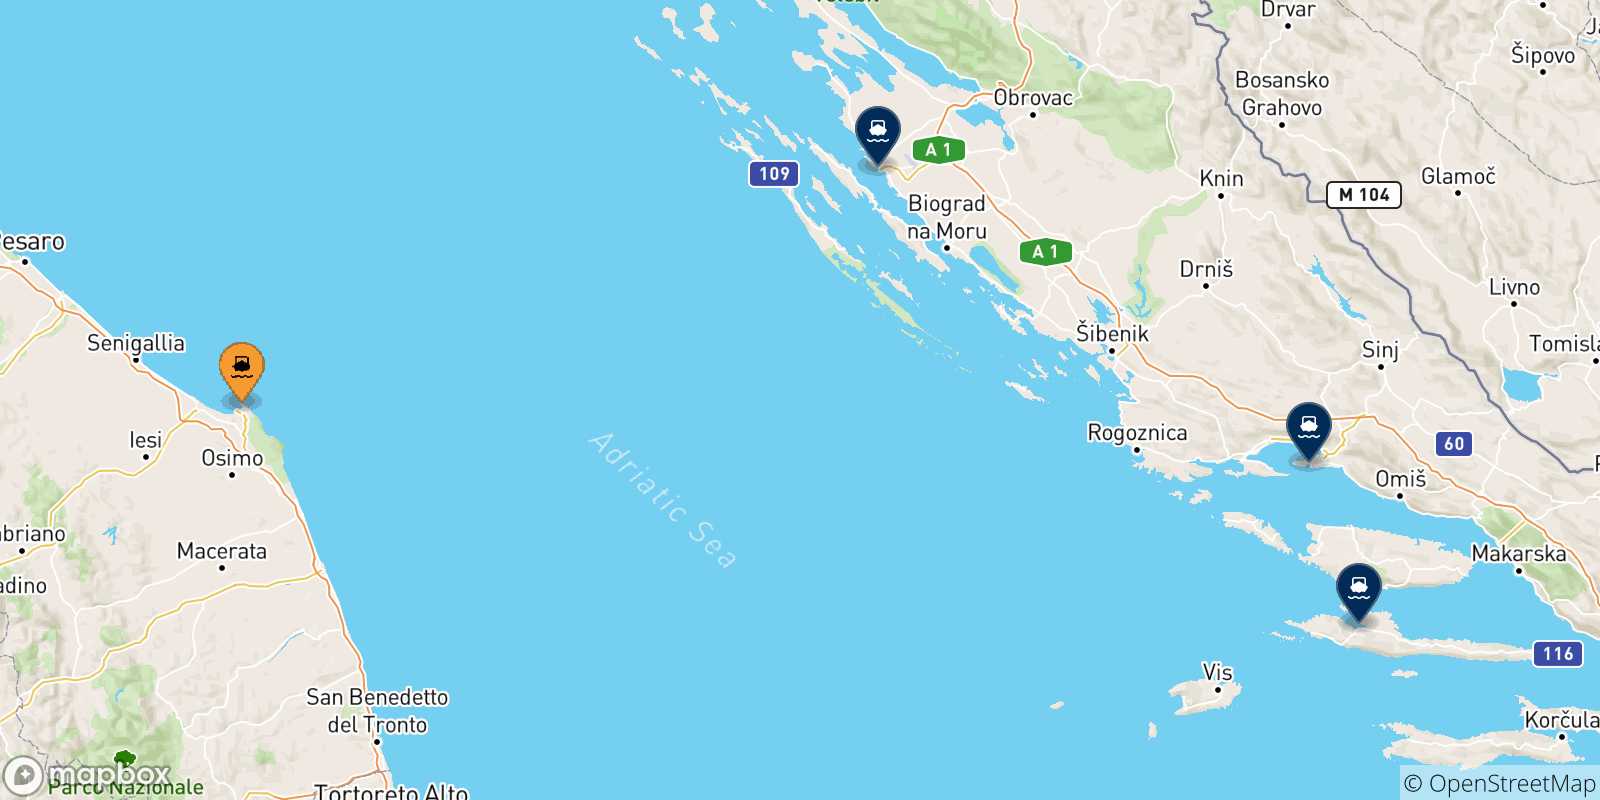 Map of the possible routes between Ancona and Croatia